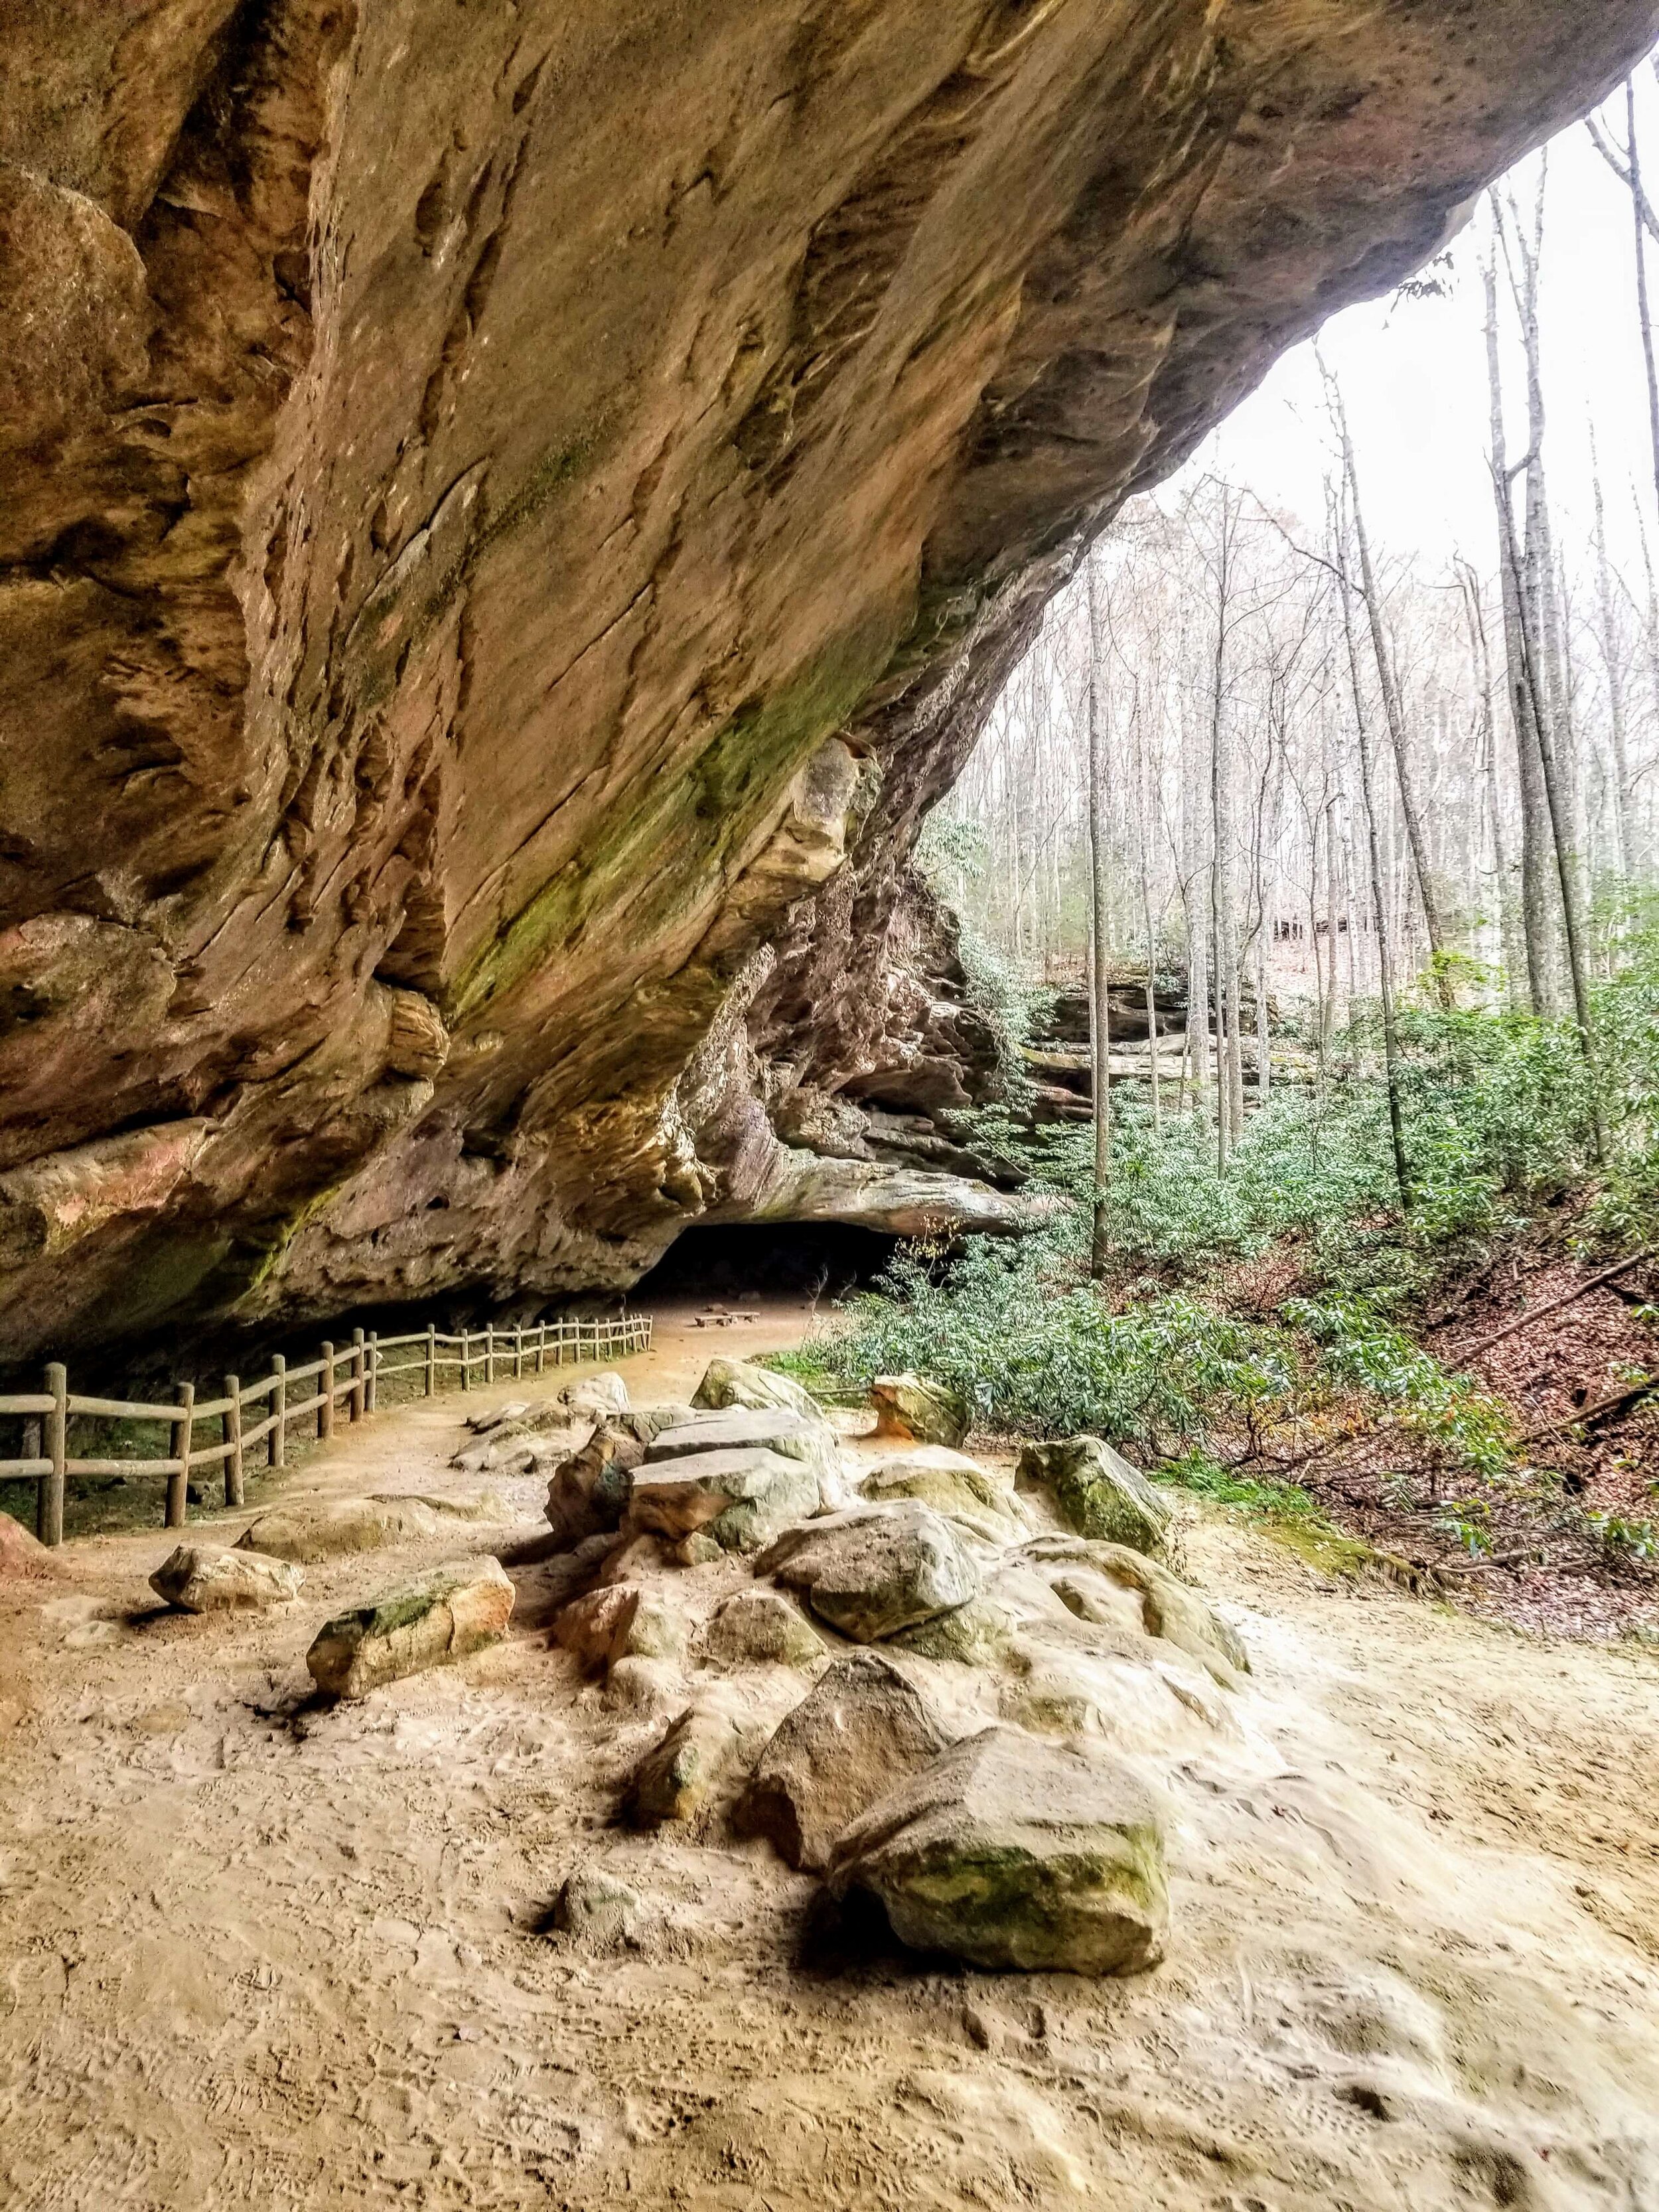 The outstanding rock shelter that is Hazard Cave